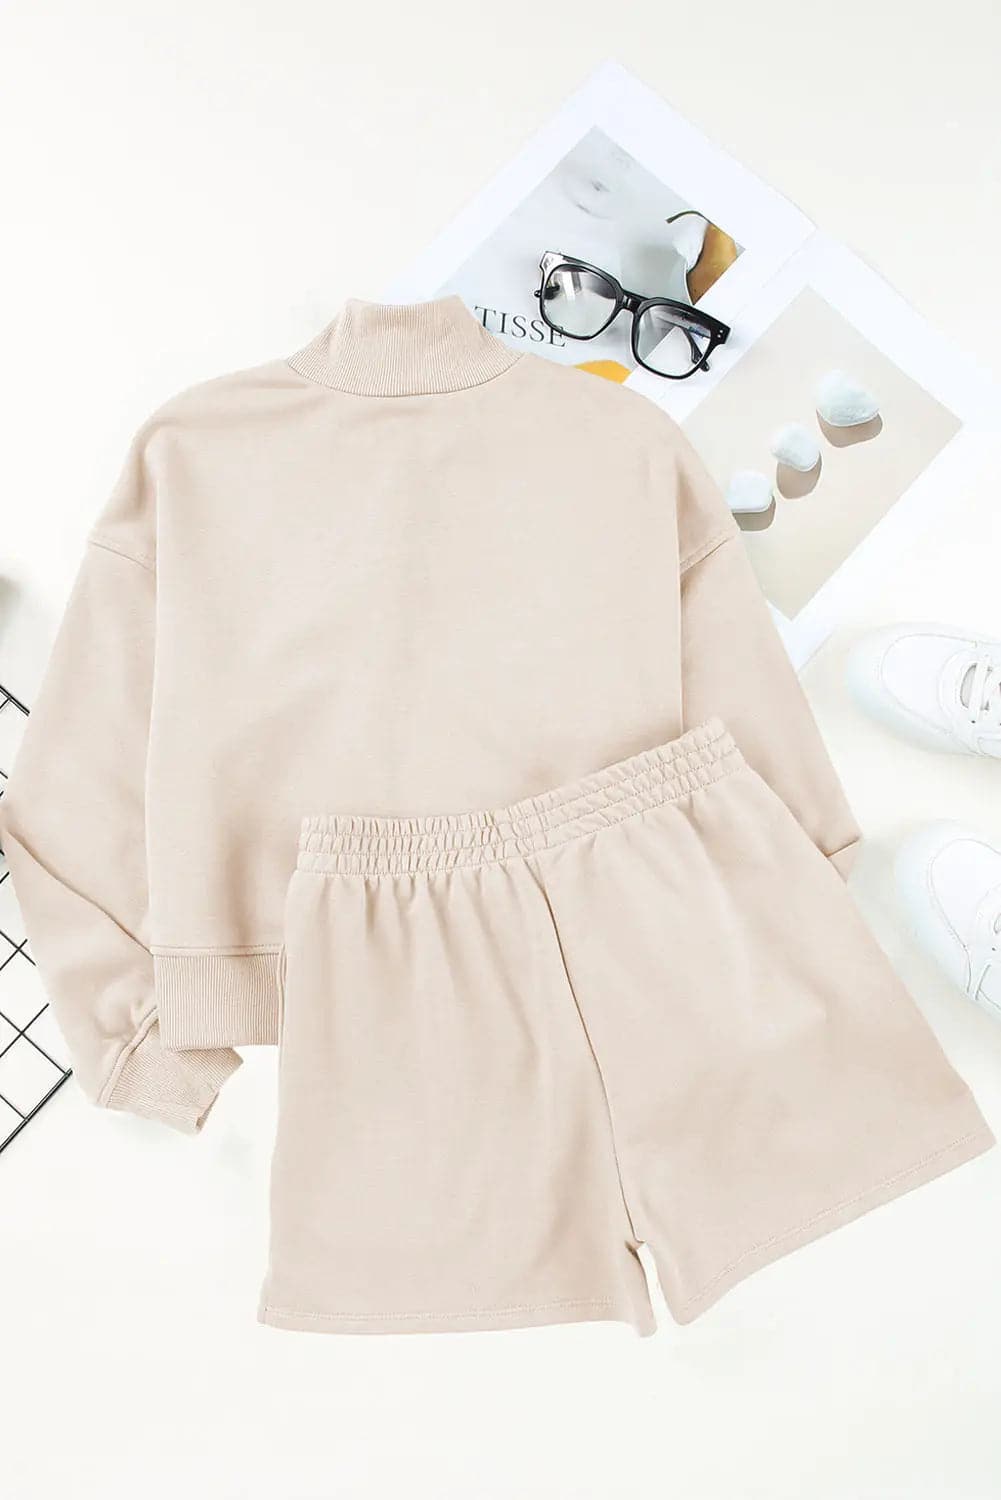 Casual Two Piece Shorts | Apricot Short Set | BioBodyBoost